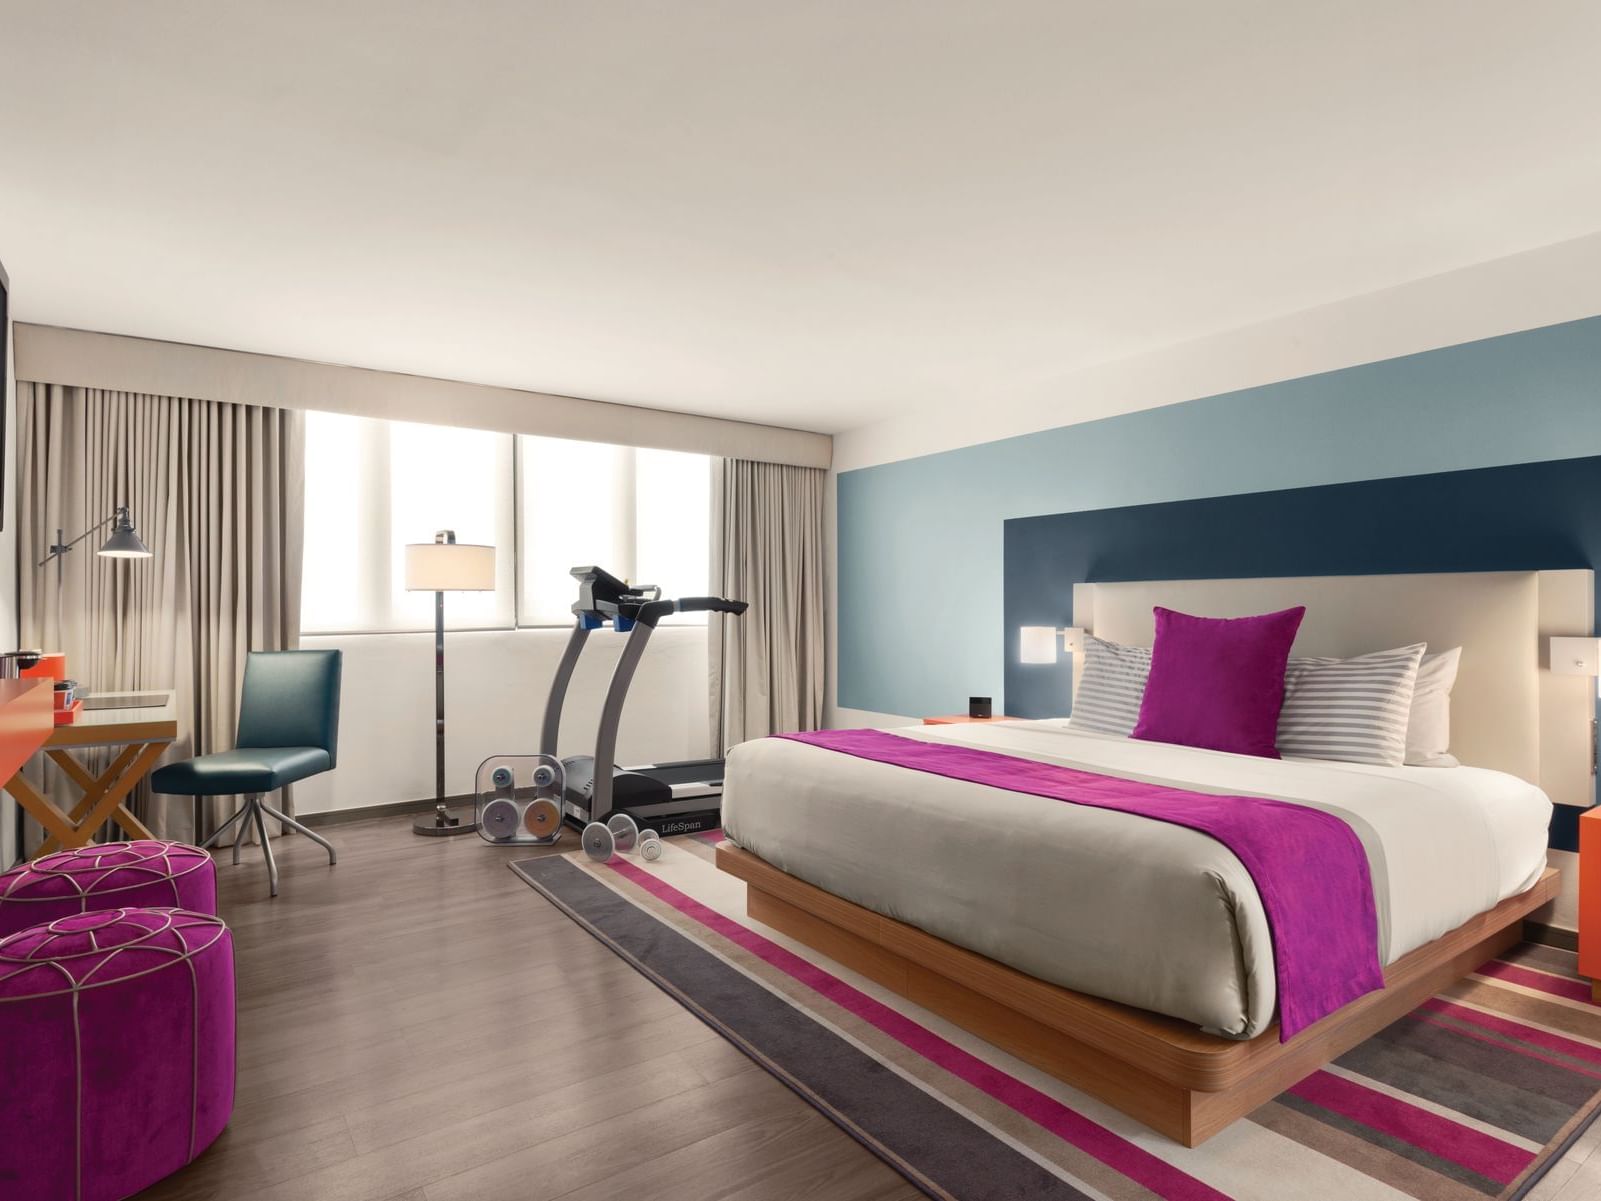 TRYP by Wyndham Isla Verde hotel room with king bed, treadmill and dumbbells near desk